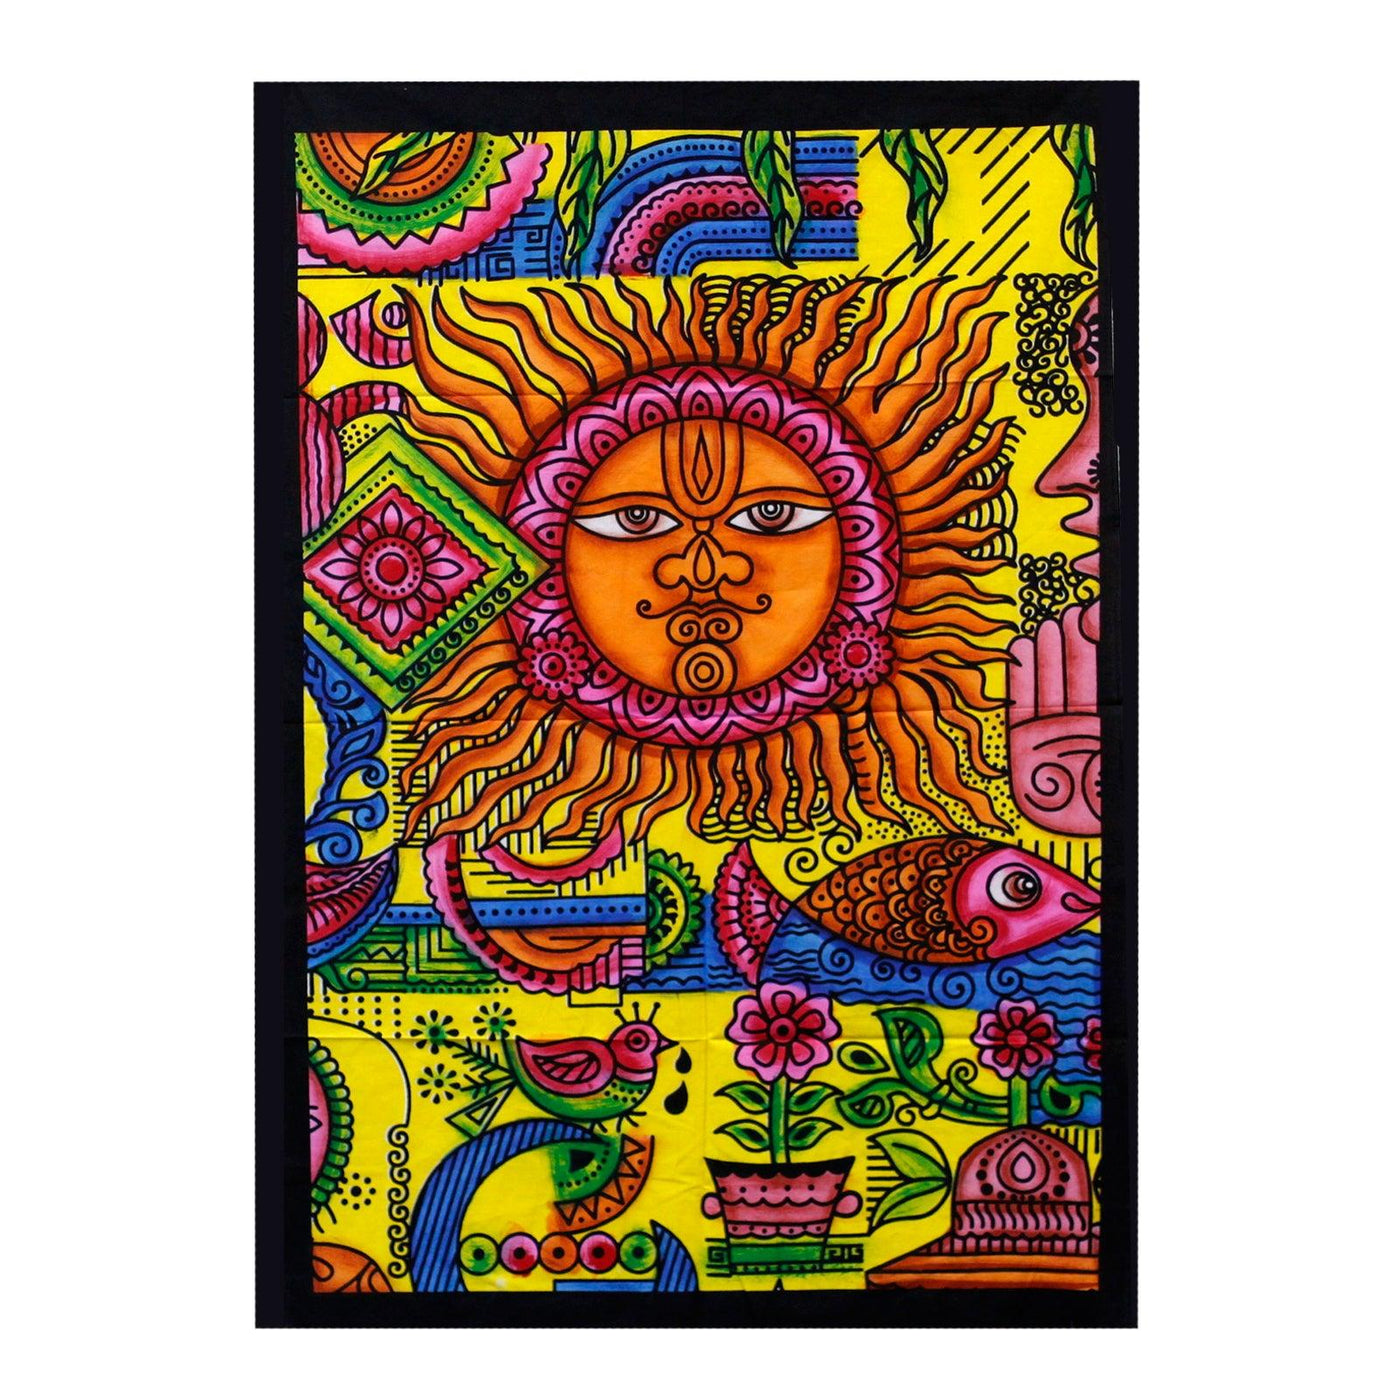 Hand-brushed Cotton Wall Hangings Tapestry, The Sun Design.